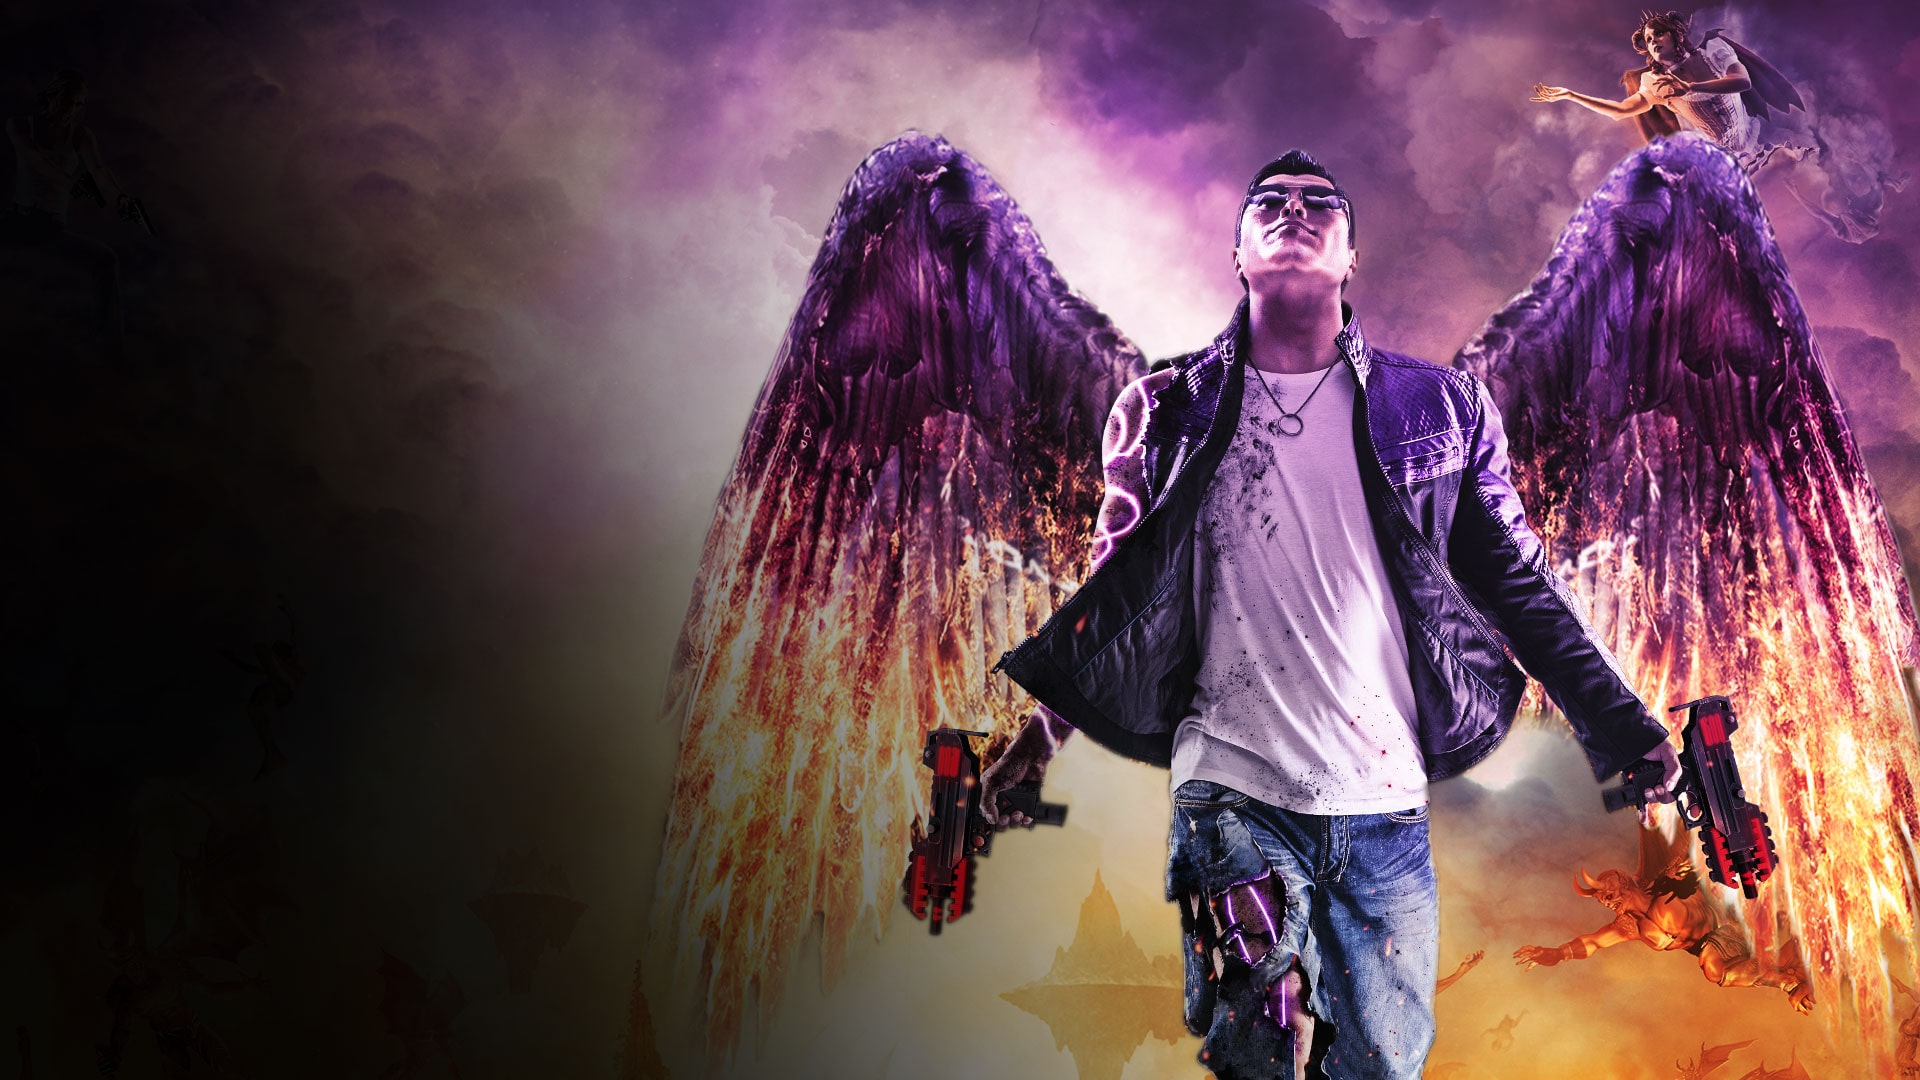 Saints Row: Gat Out Of Hell Wallpapers